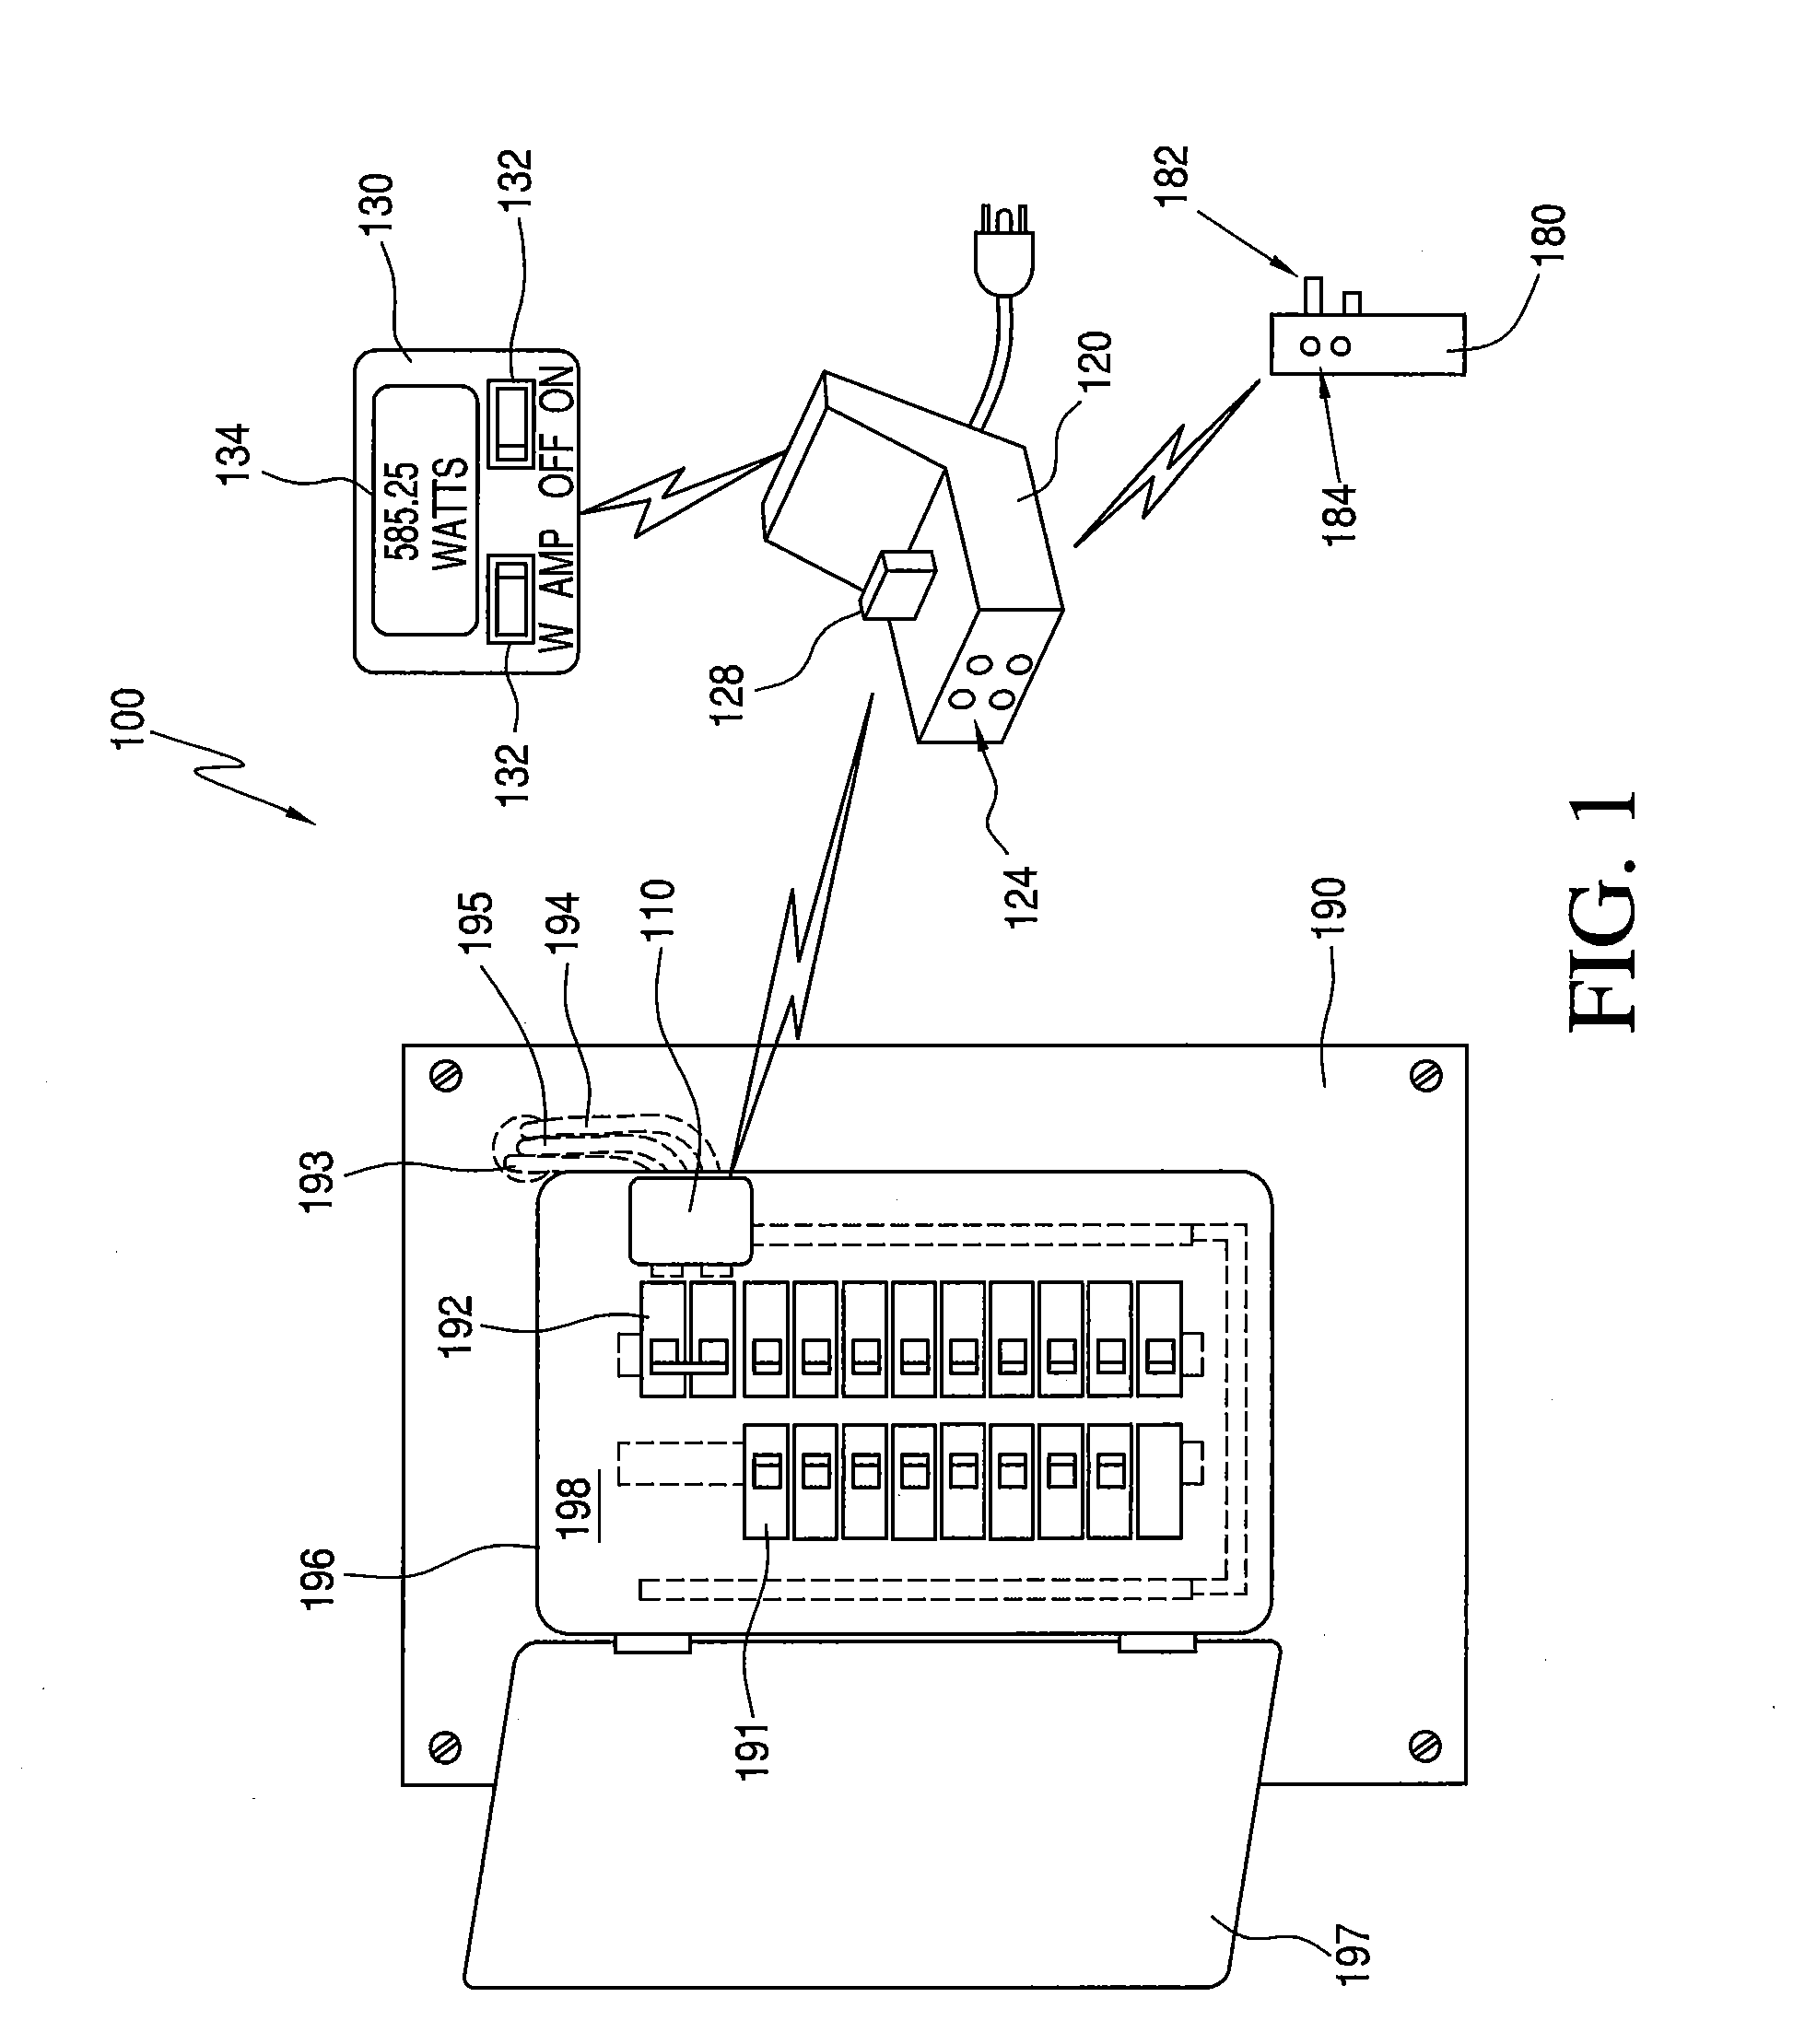 System and method for monitoring electrical power usage in an electrical power infrastructure of a building